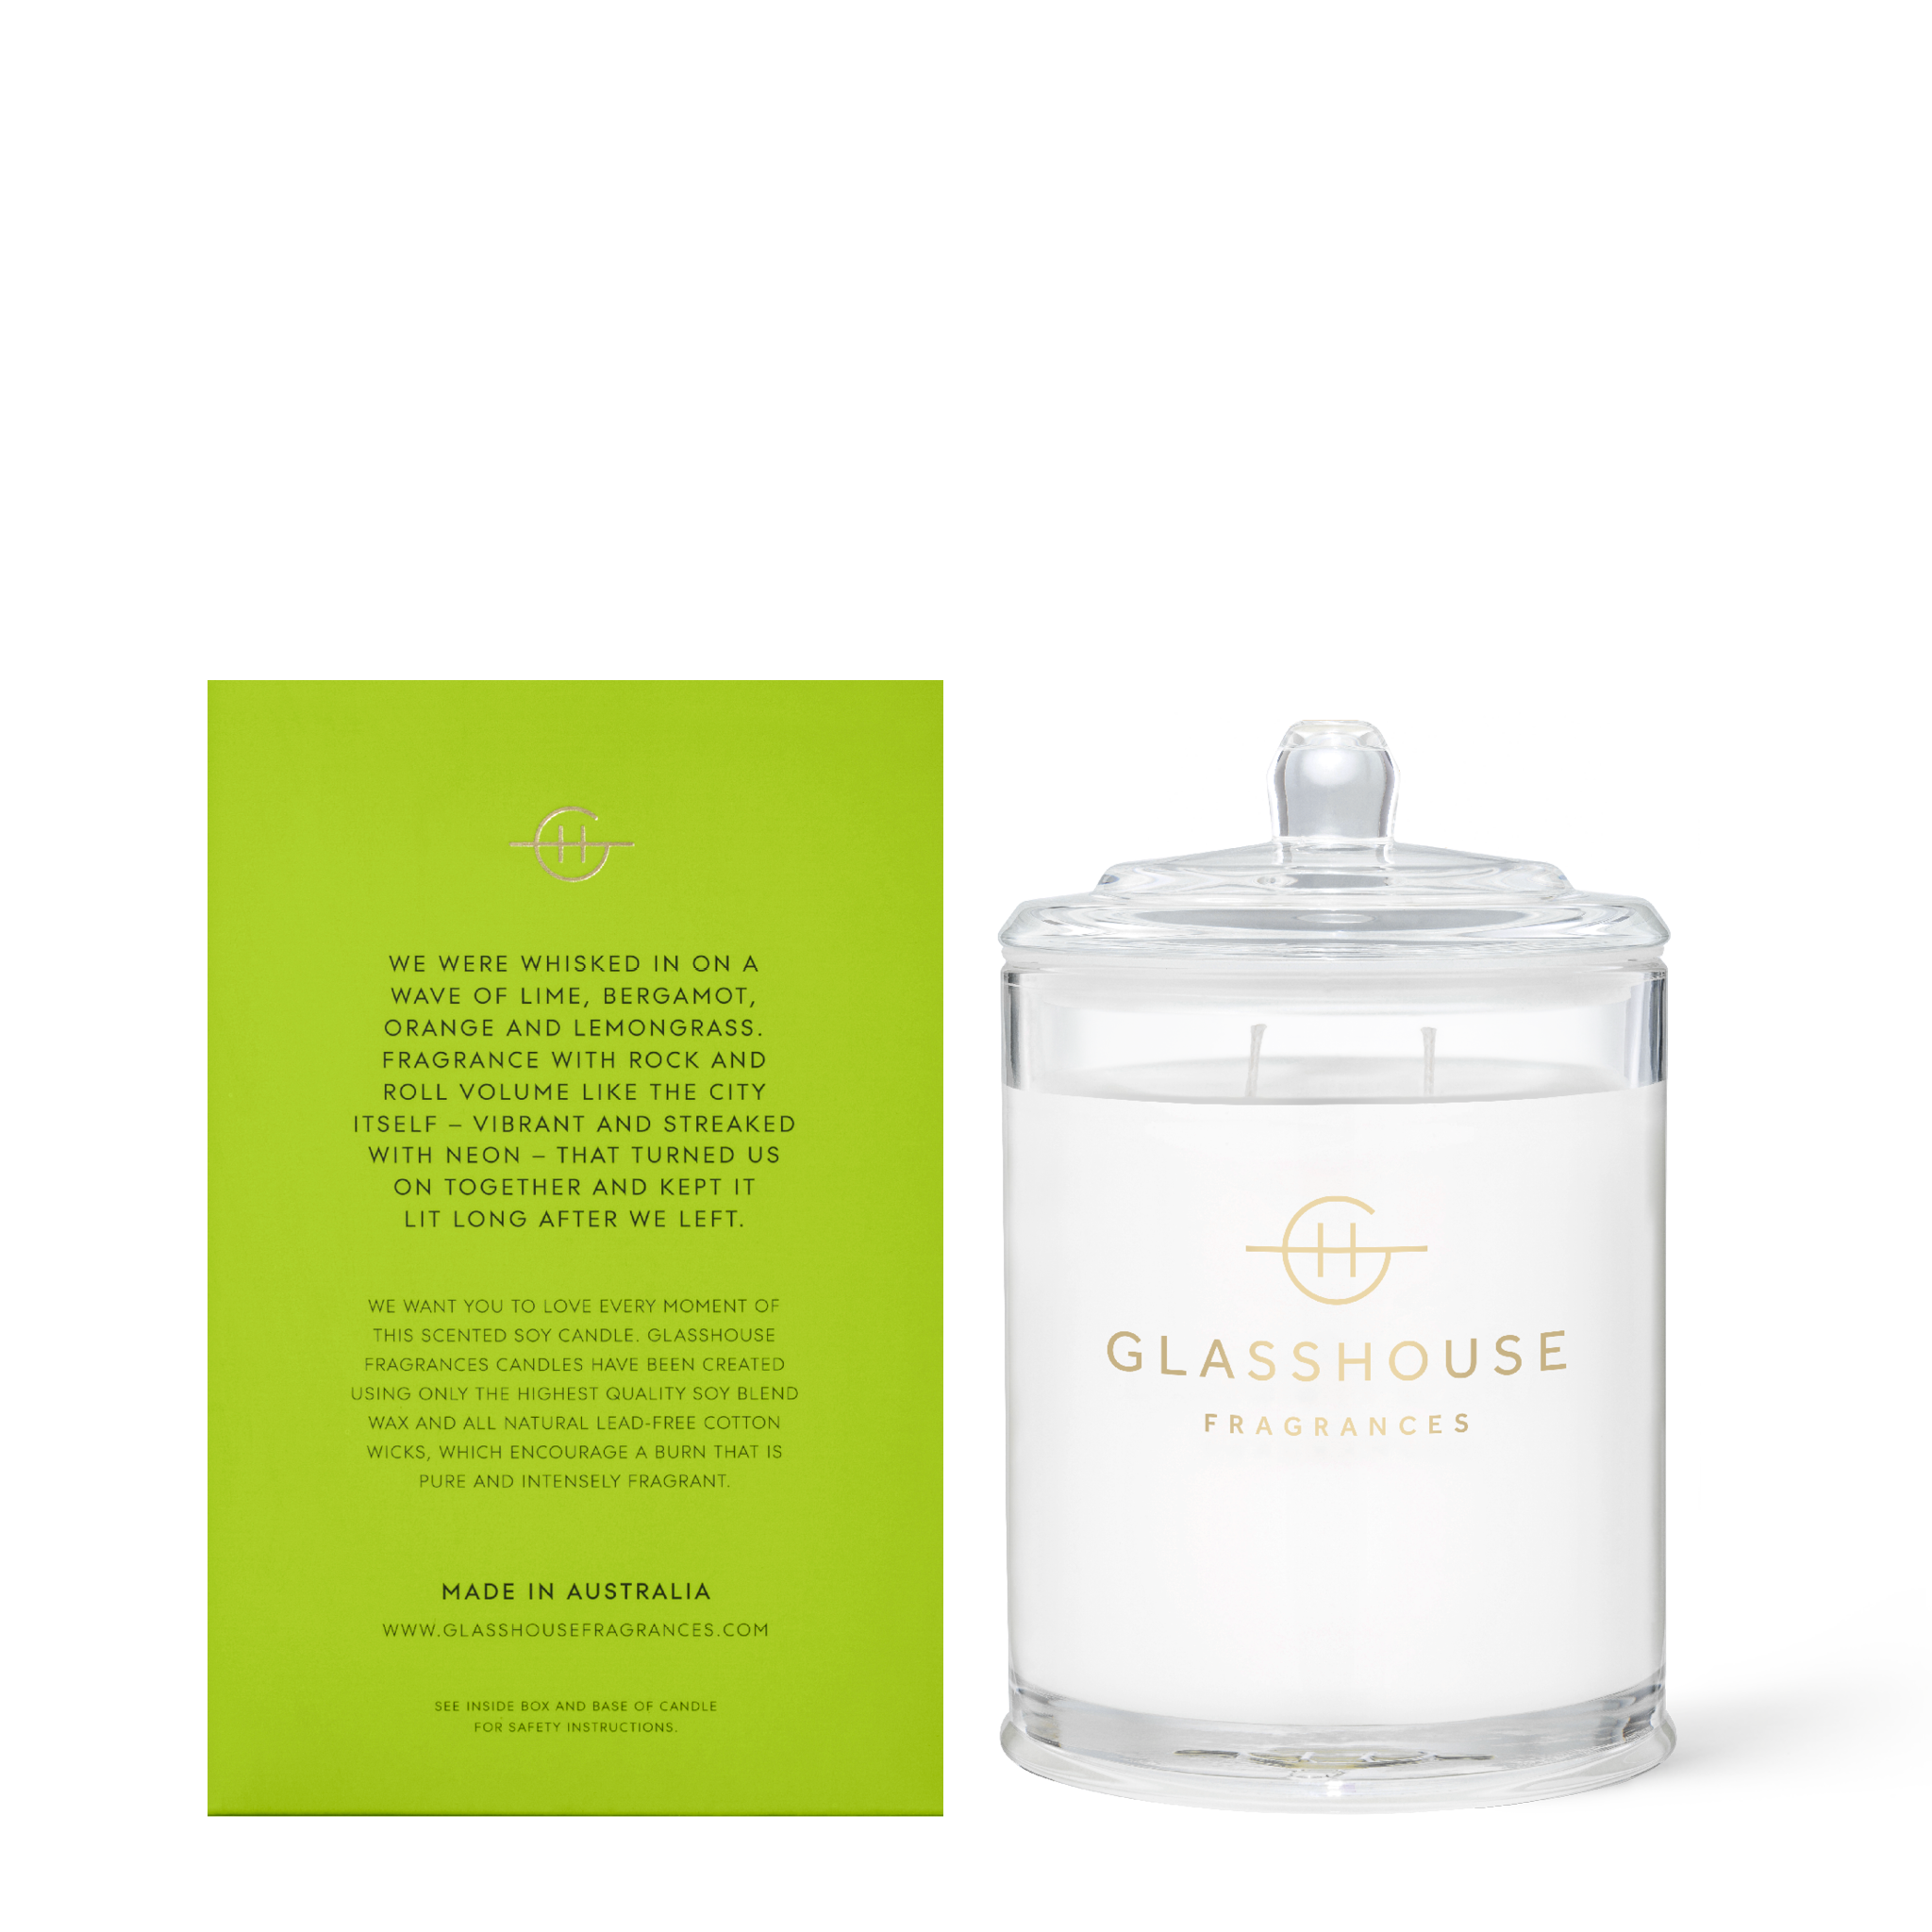 Glasshouse Fragrances We Met in Saigon Lemongrass 380g Soy Candle with box - back of product shot